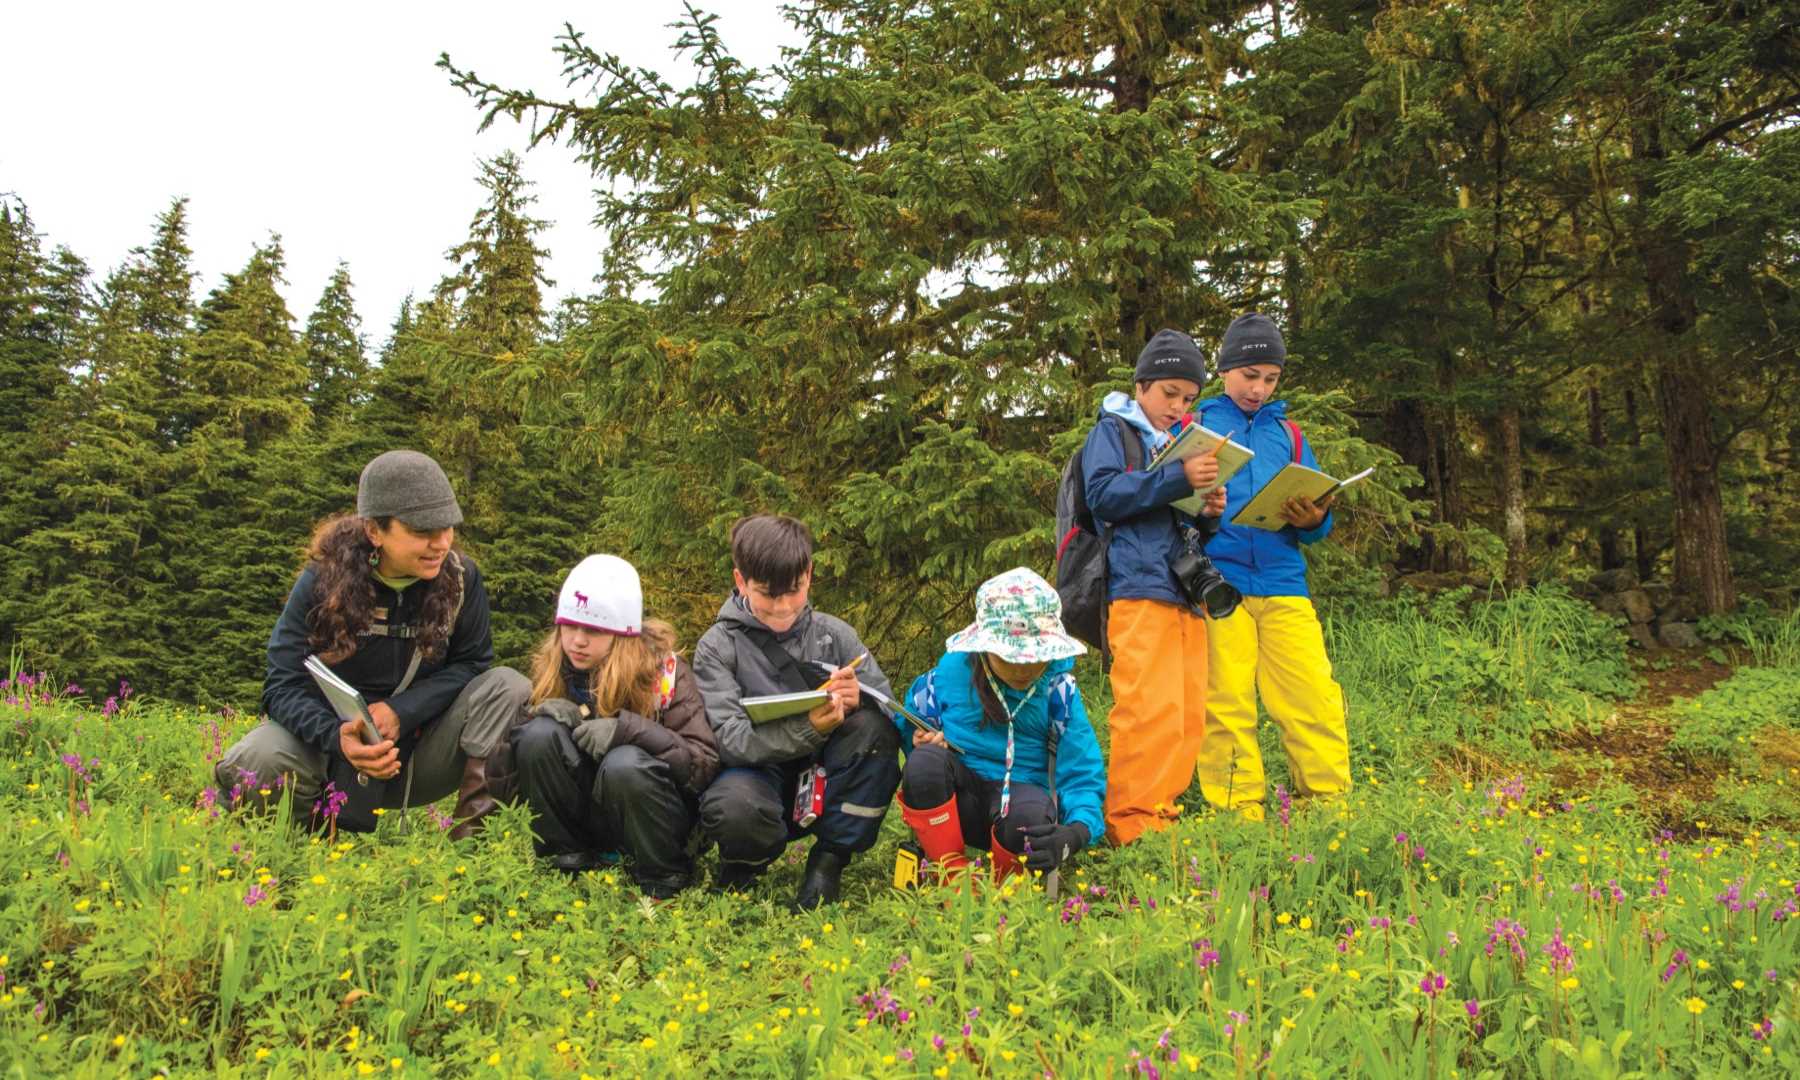 A group of children study some written material while out in the woods